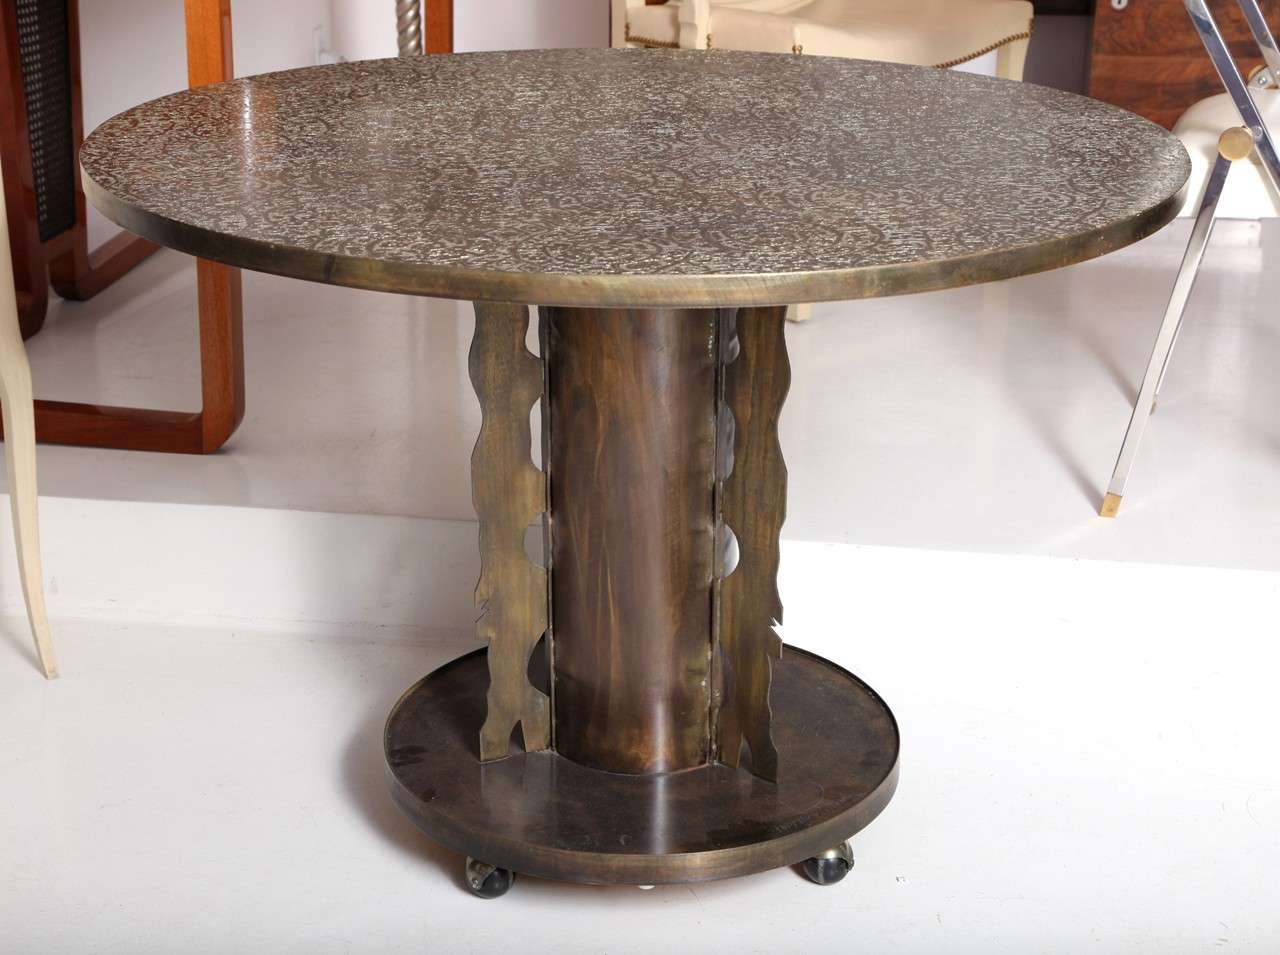 PHILIP (1908-1988) and KELVIN (b. 1936) LAVERNE
Center table with Etruscan motif decorated top raised on
pedestal base with cutout flange details, on casters.
Signed.
American, c. 1960

